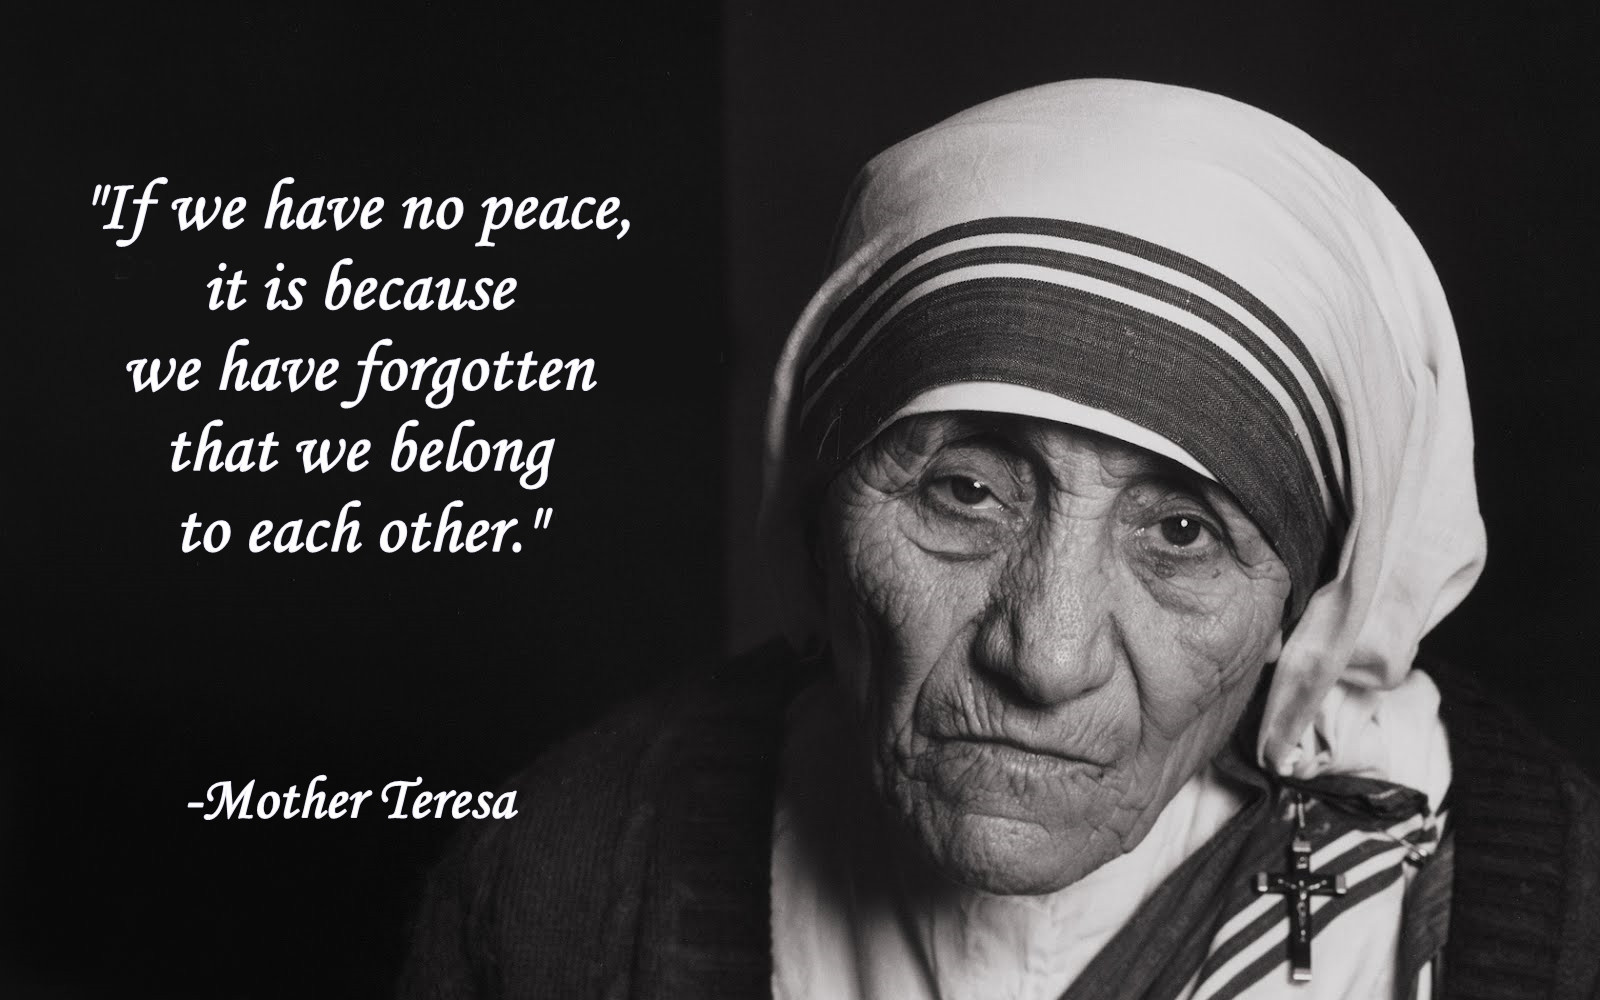 Mother Teresa Peace Quotes
 Interview with Albanian MoFA published by Foreign fice